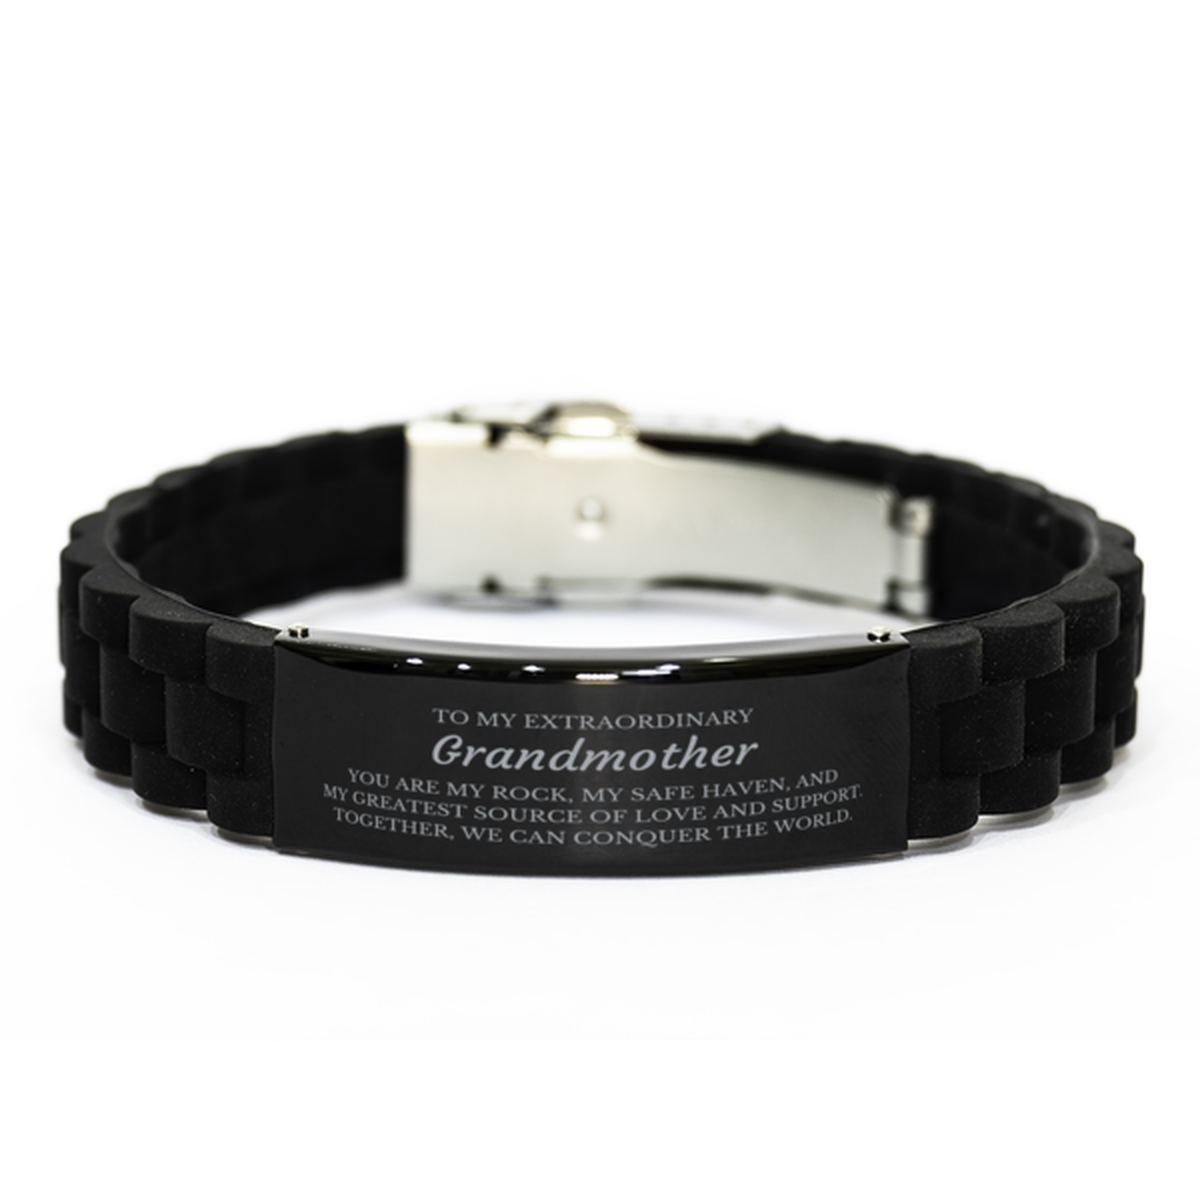 To My Extraordinary Grandmother Gifts, Together, we can conquer the world, Birthday Black Glidelock Clasp Bracelet For Grandmother, Christmas Gifts For Grandmother